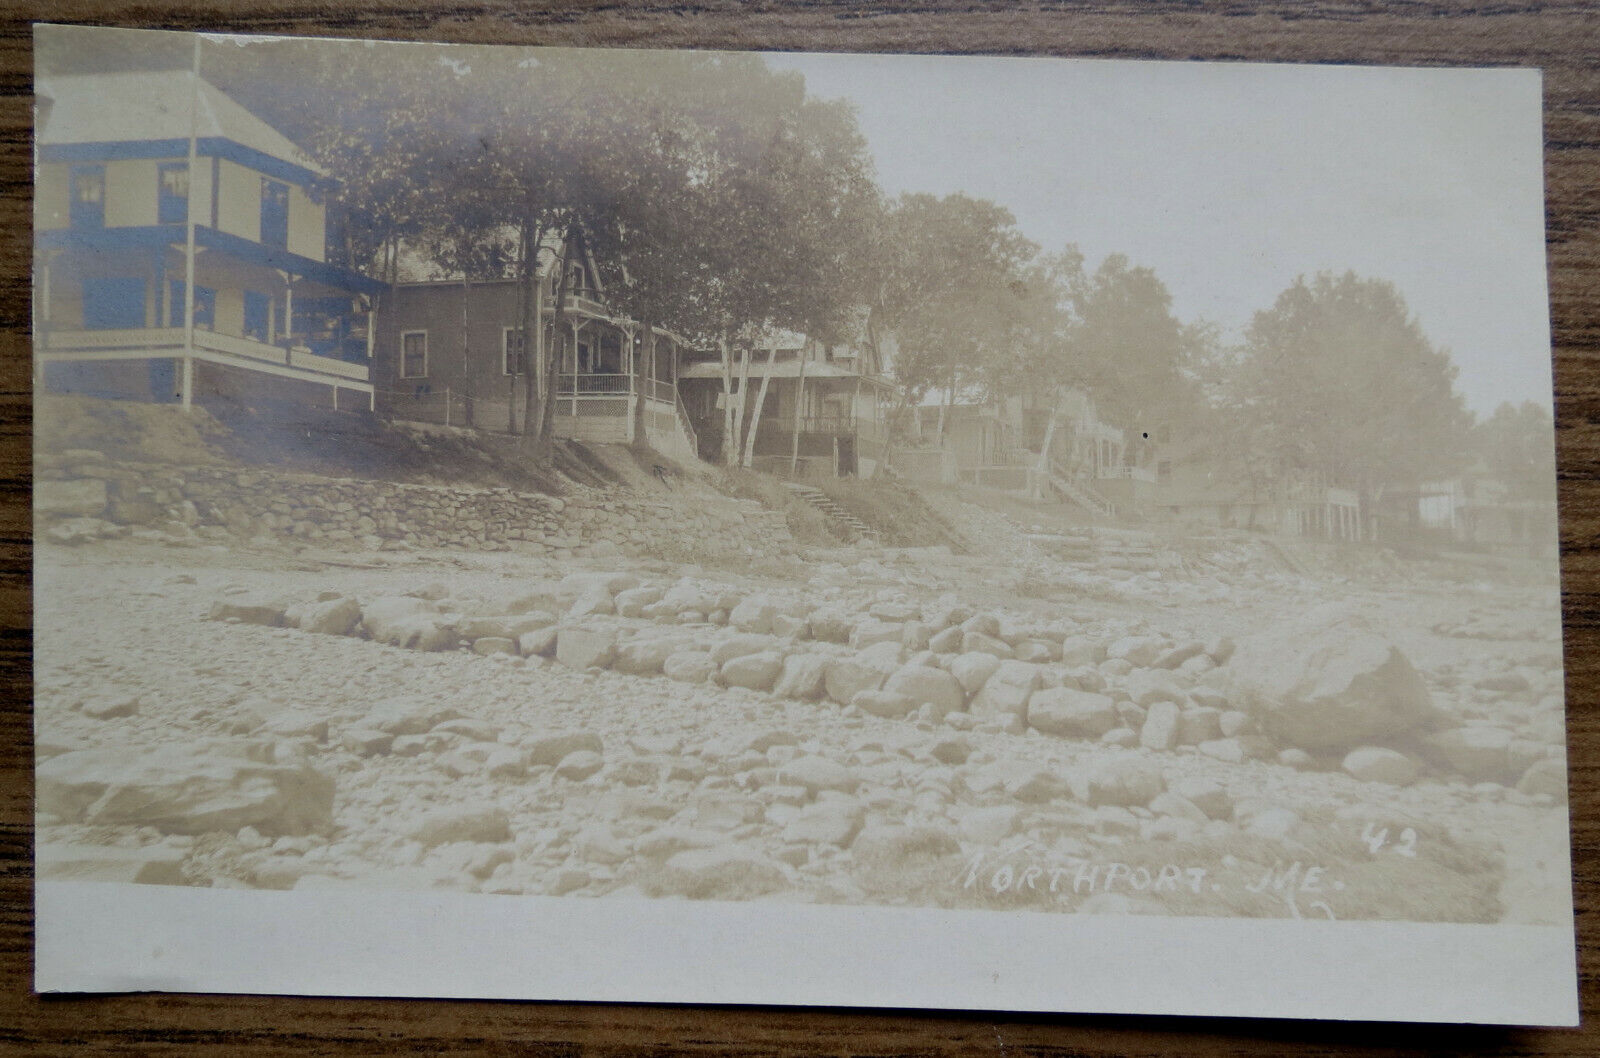 NORTHPORT MAINE BEACH HOUSES - Old Real Photo Postcard